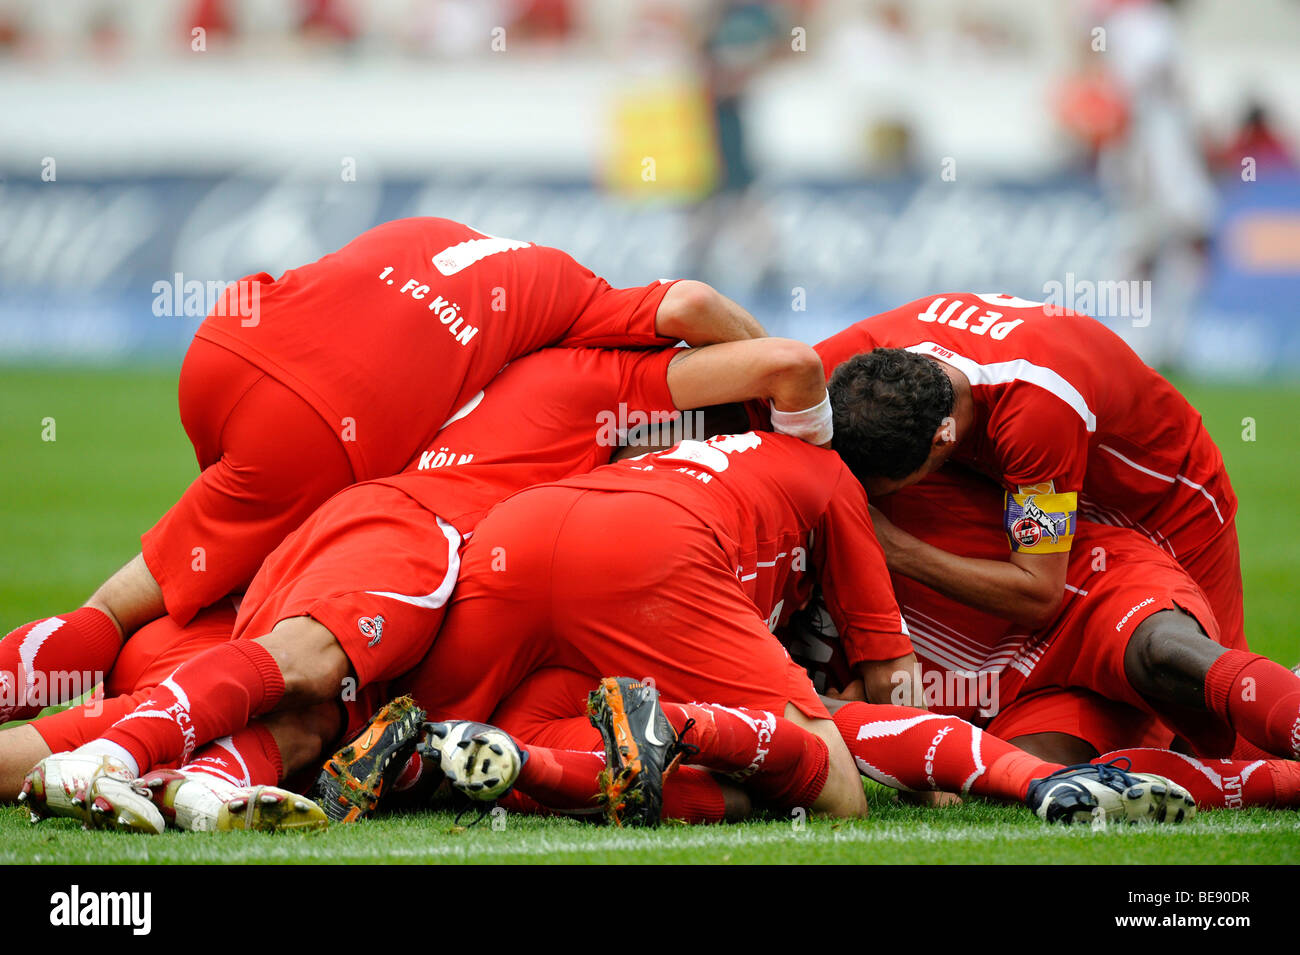 Players celebrating a goal, 1 FC Cologne Stock Photo